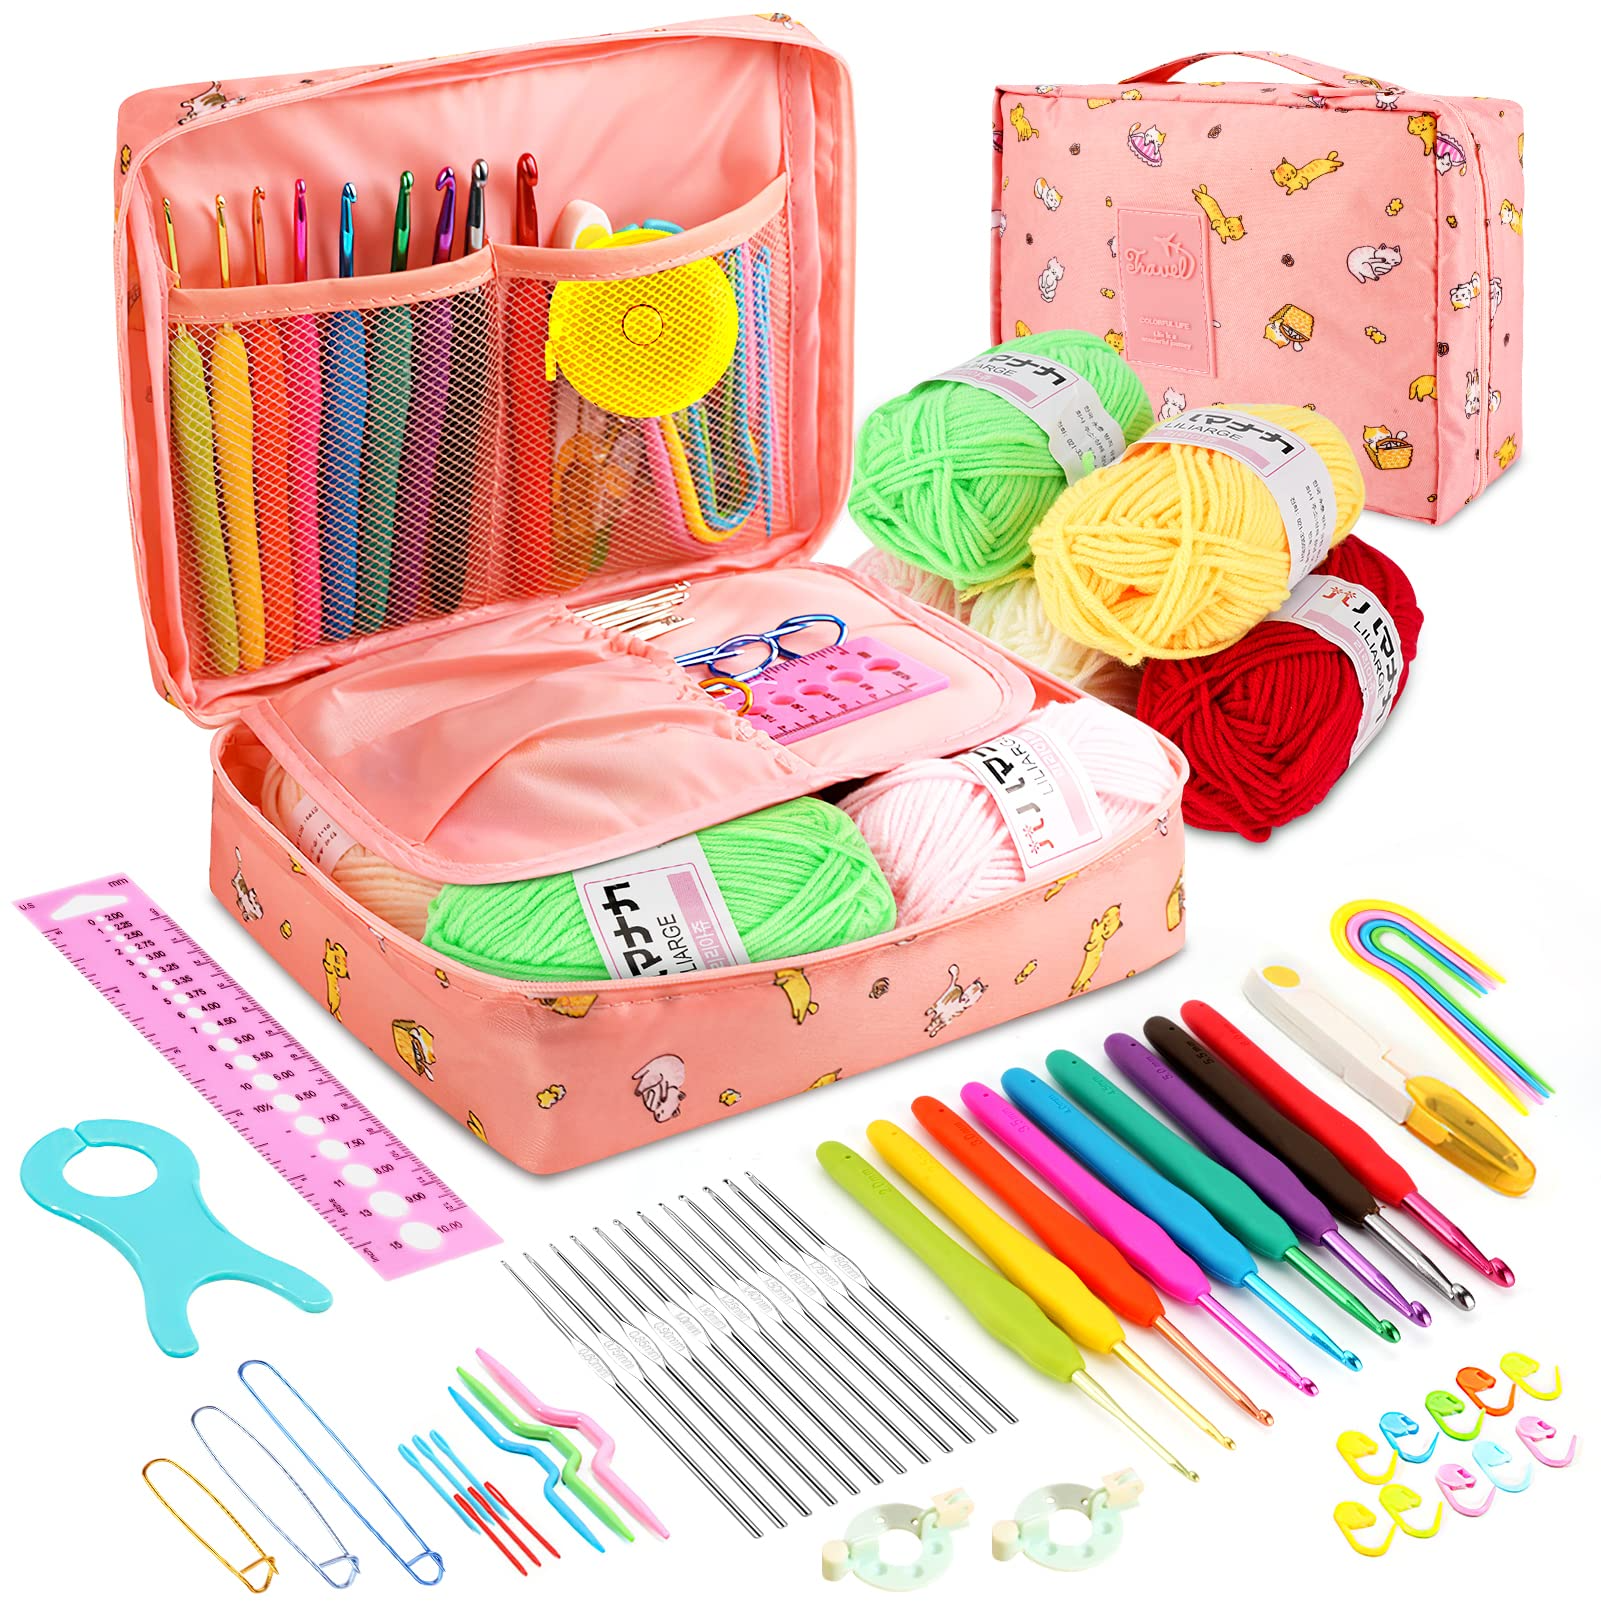 Crochet Kit , 59 Piece Crochet Hooks Kit Includes Soft Grip Crochet Hooks,  Crochet Yarn Balls, Cable Needles and More Crochet Kit for Beginners with  Light Pink Carry Bag 